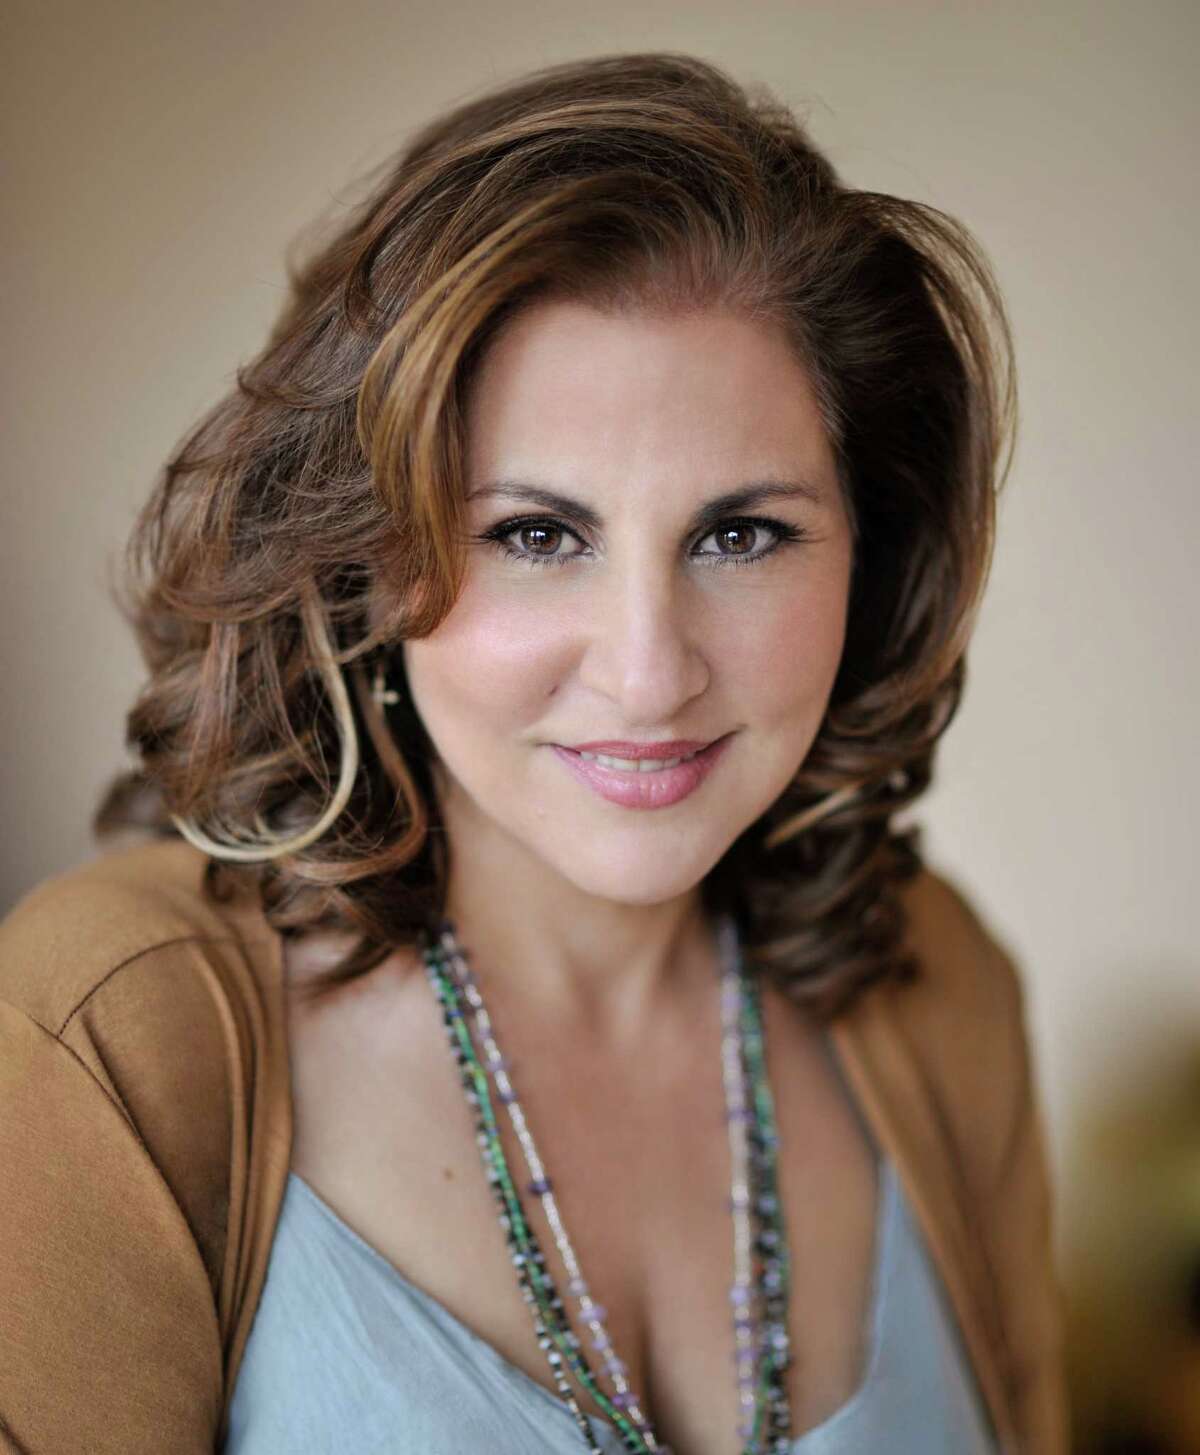 Kathy Najimy, best known for movie roles in “Sister Act” and “Ho cus Pocus,” says her solo show is a hybrid of play and monologue.